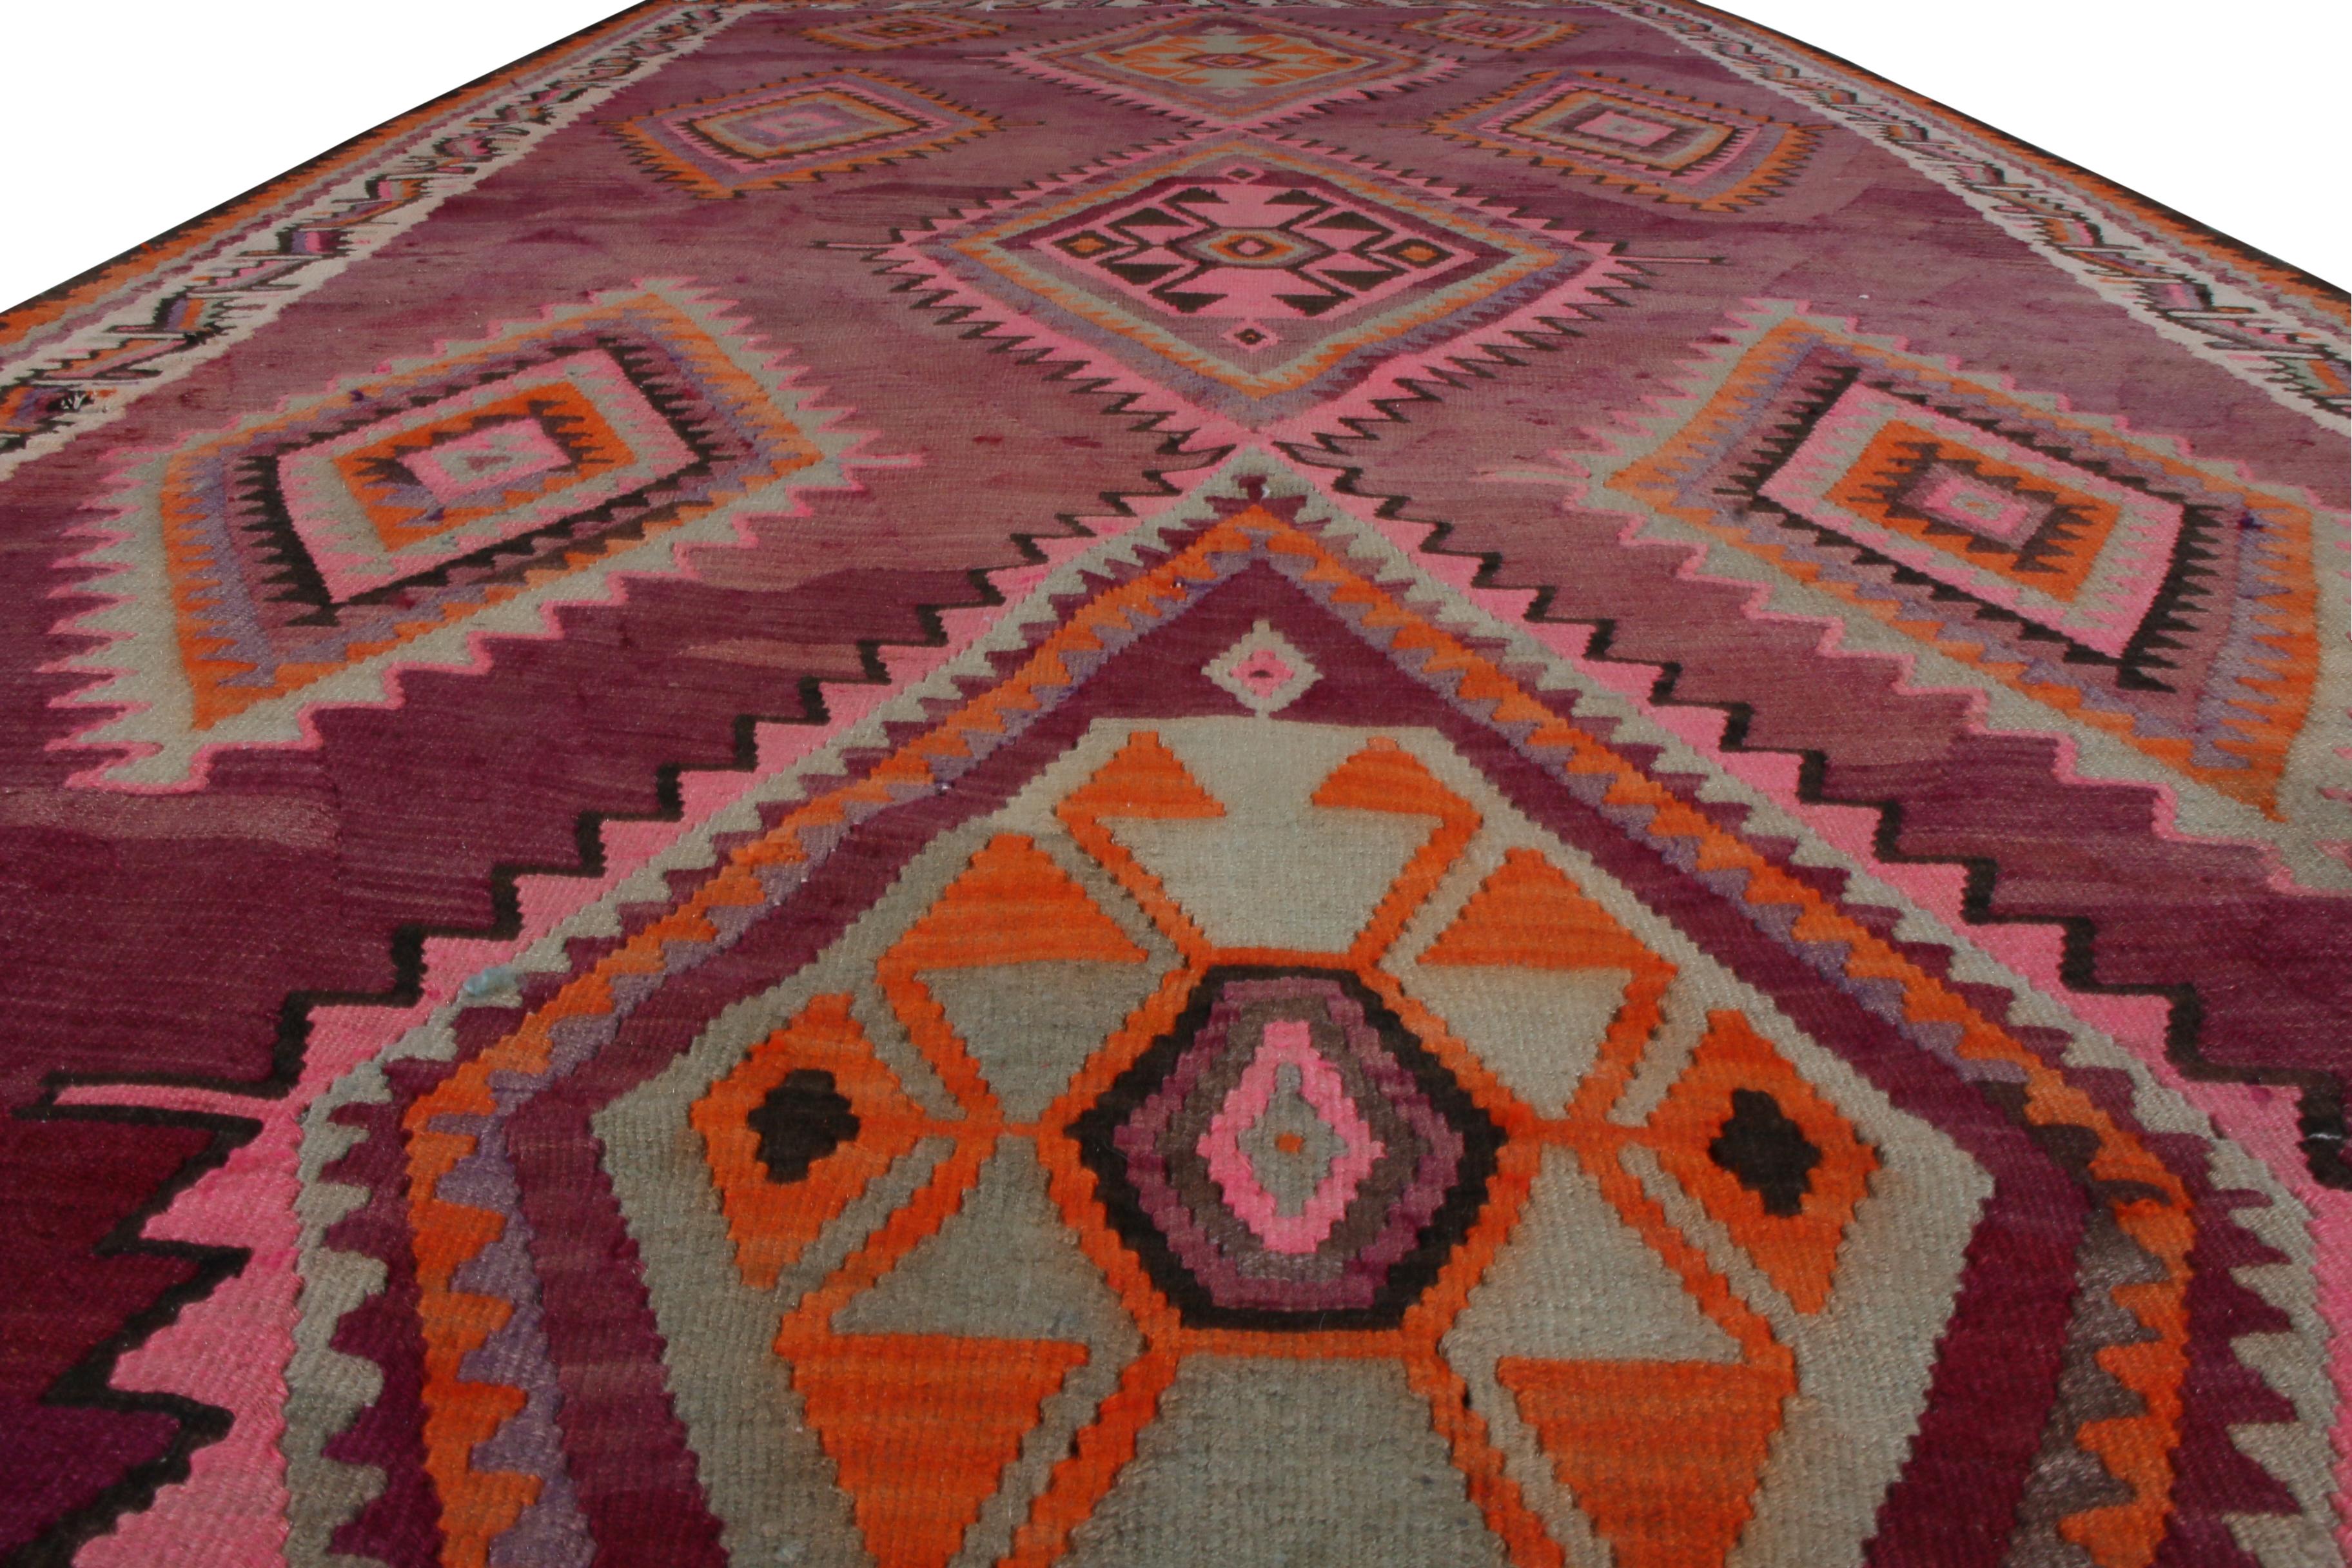 Handwoven in wool with midcentury origins circa 1950-1960, this vintage 4’10 x 9’11 Northwest Persian Kilim rug features all-over geometric tribal patterns in red, green, orange, pink, and black. The traditional medallion patterns of this vintage